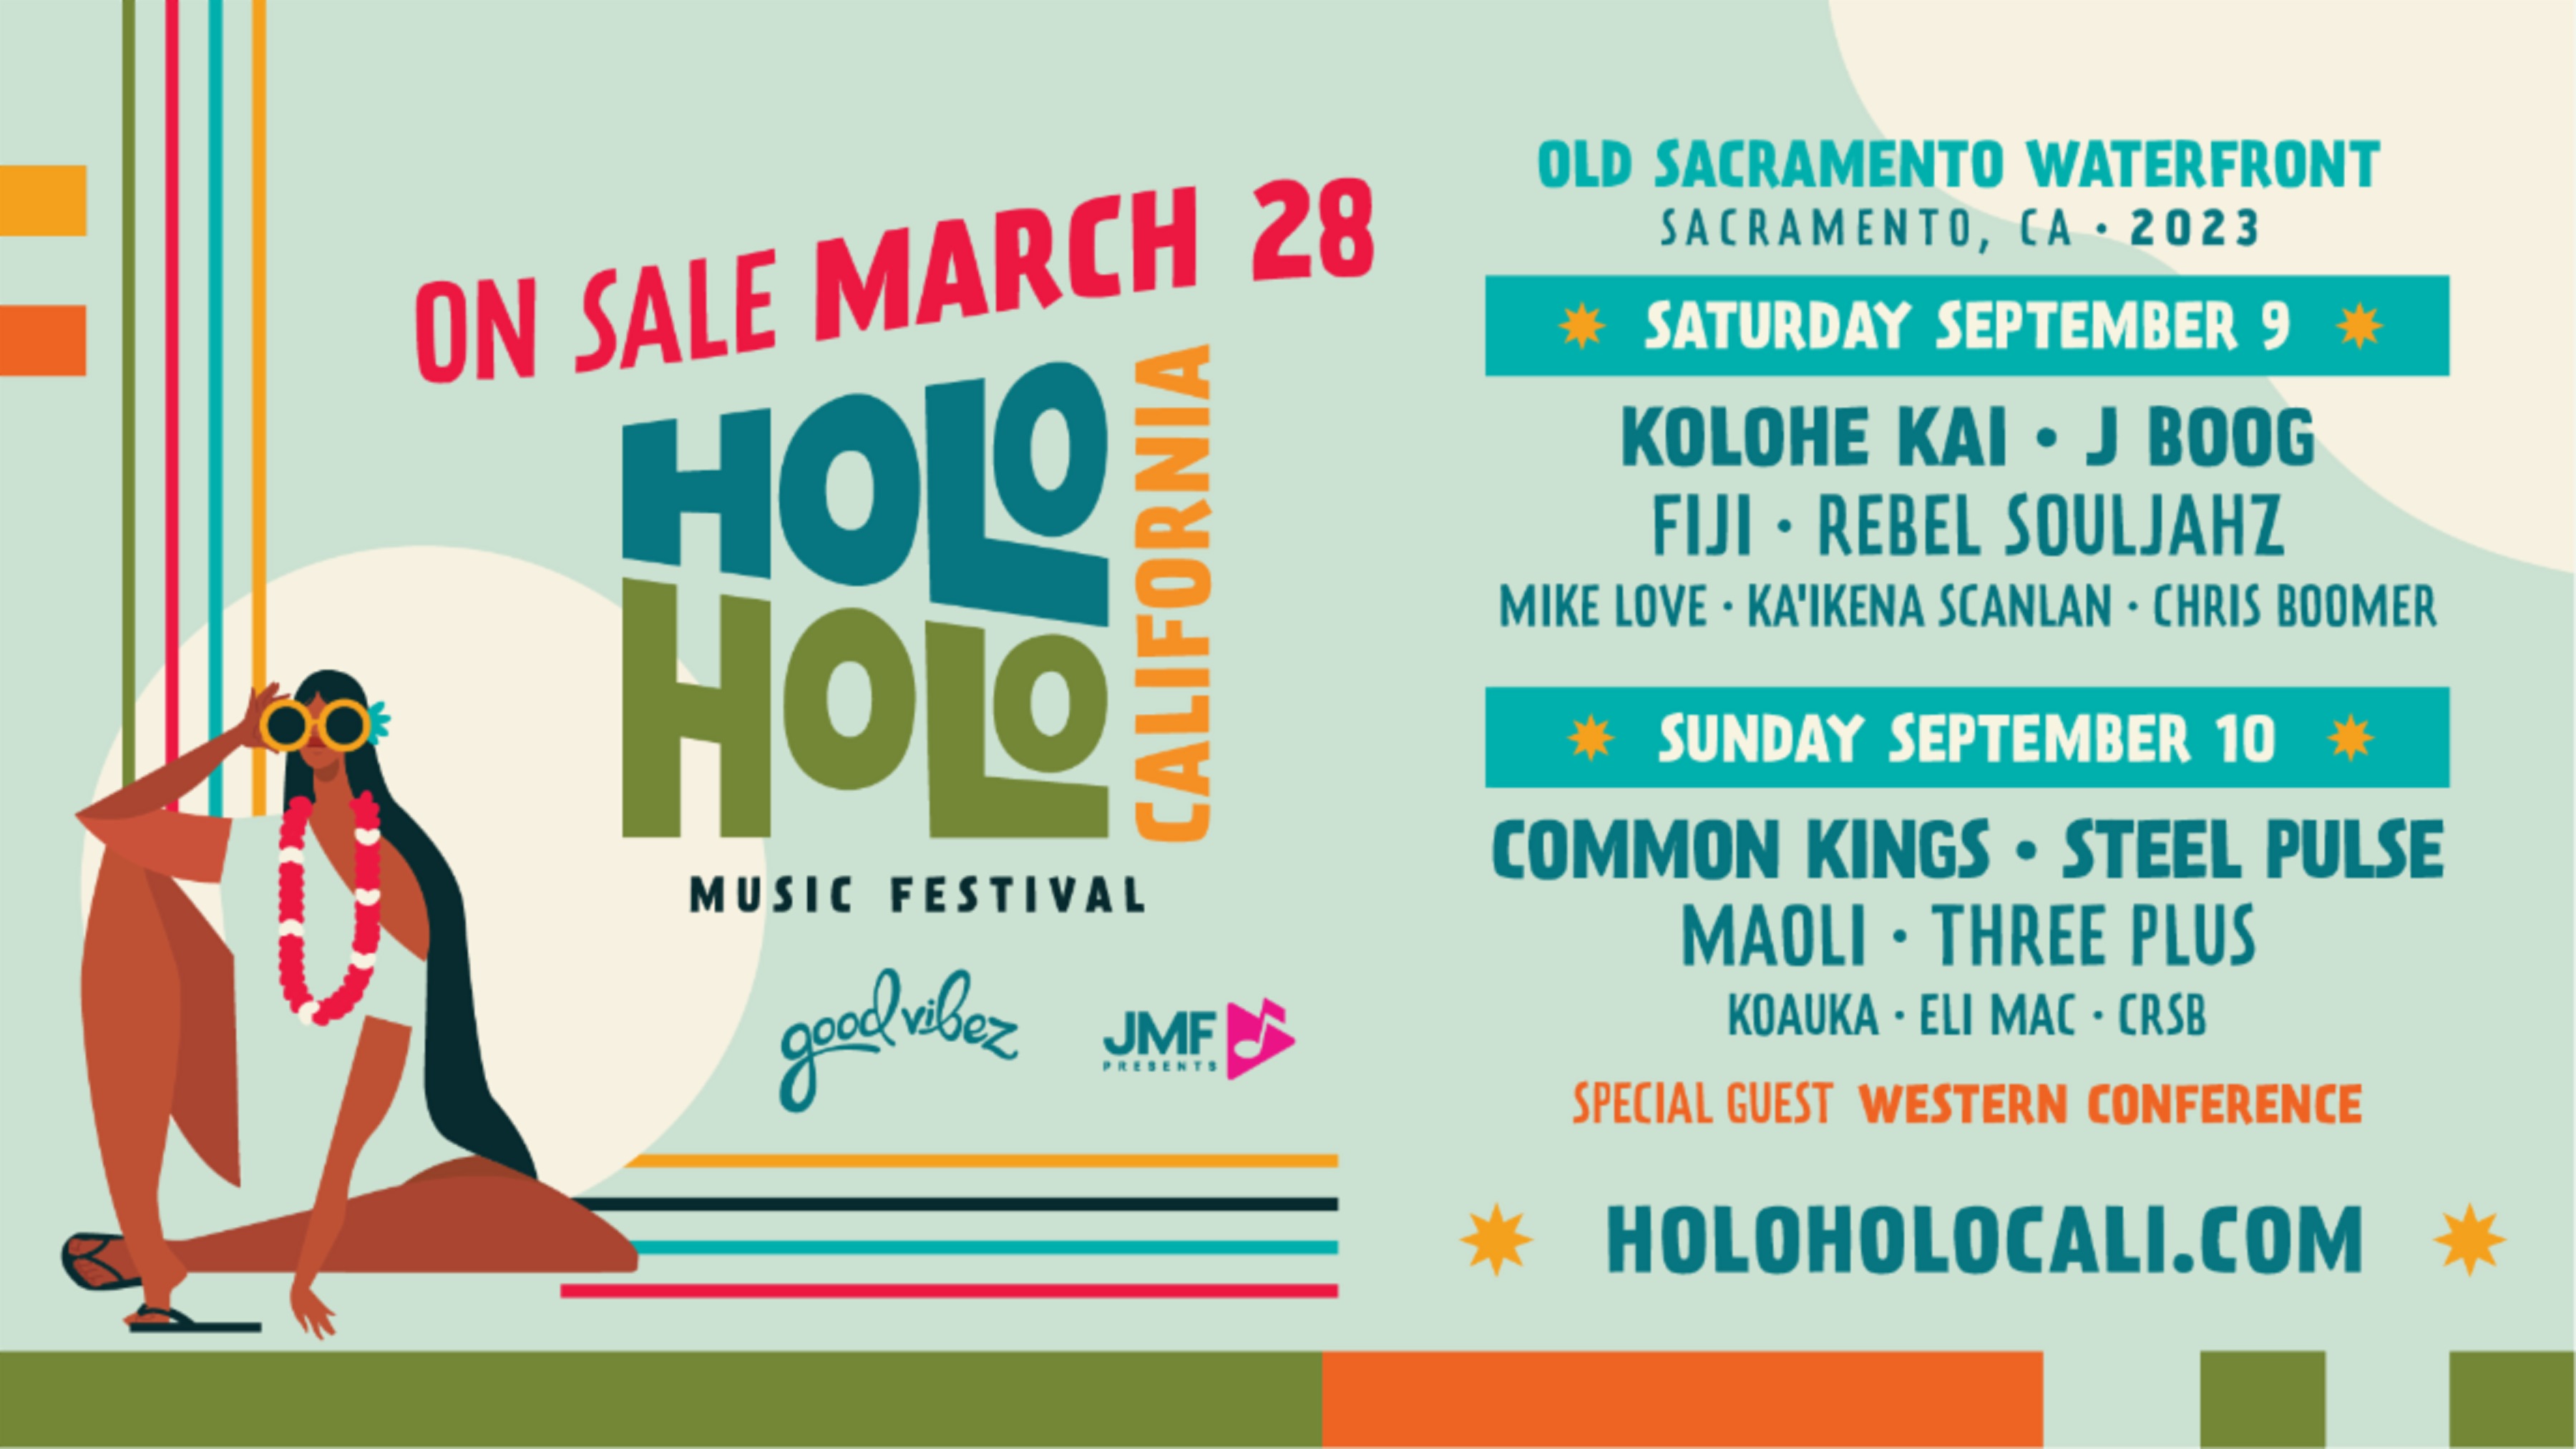 Holo Holo Music Festival Returns To California Over The Weekend Of September 9-10 at Old Sacramento Waterfront